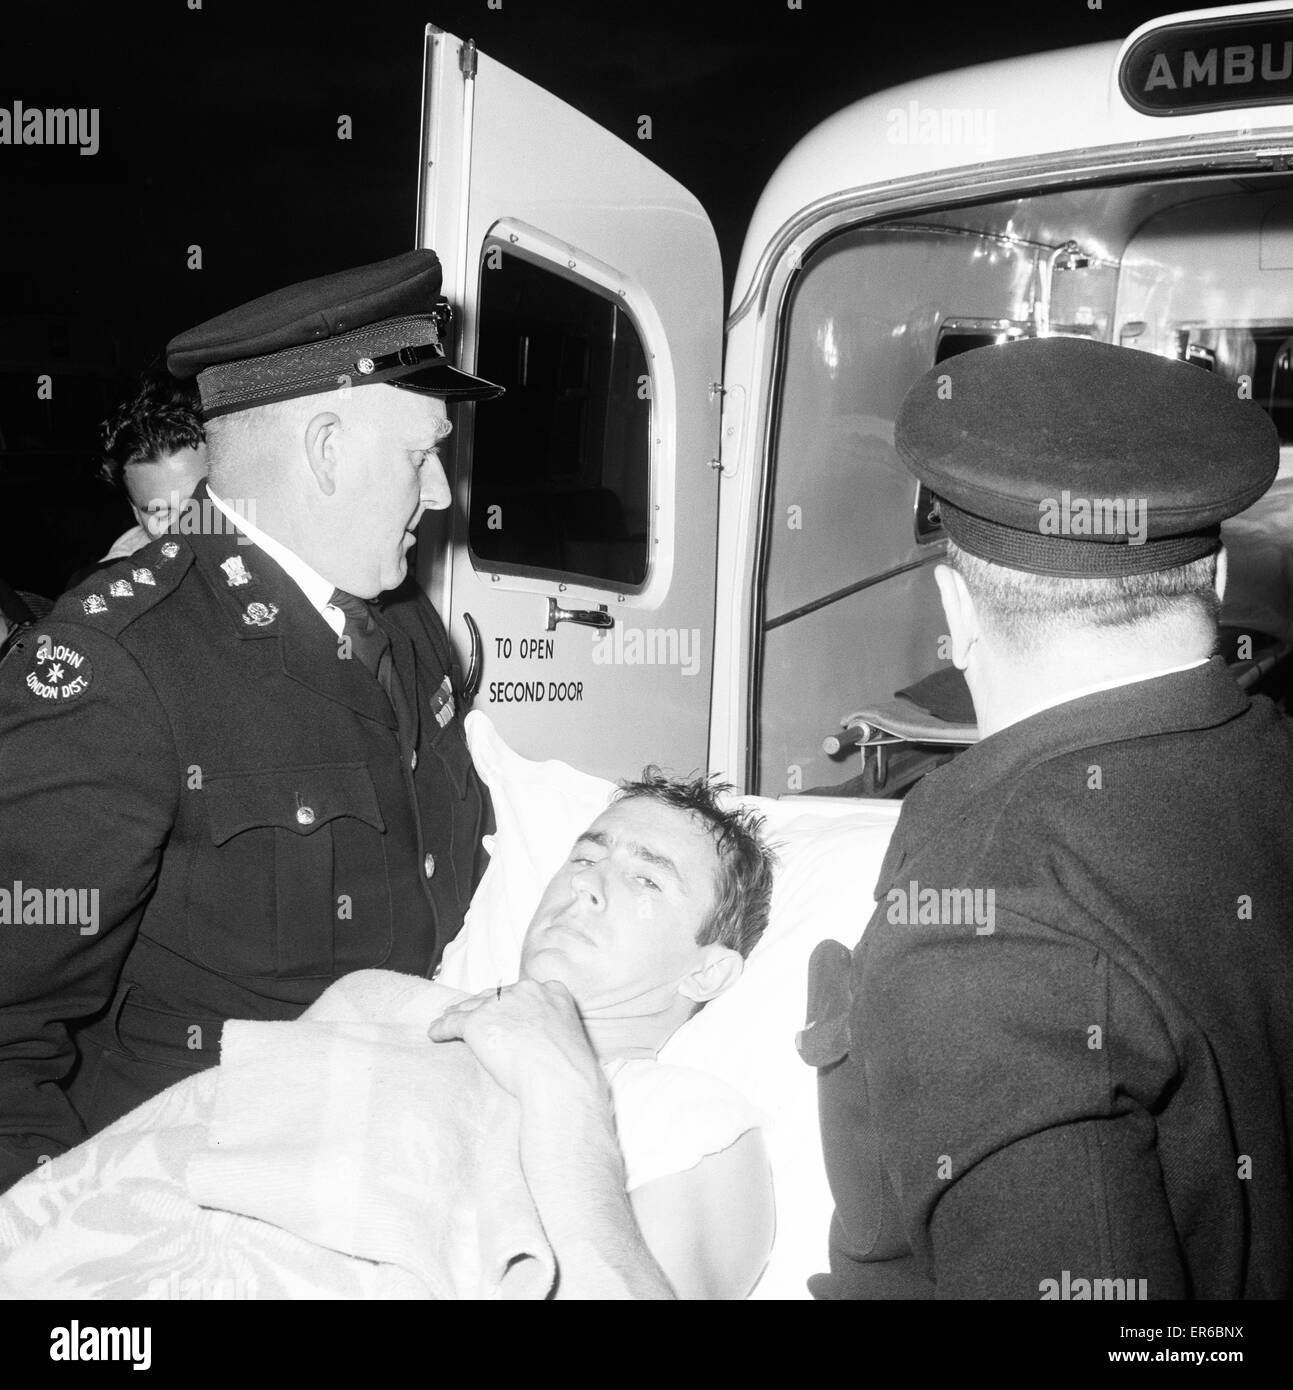 Jackie Stewart, Formula One Motor Racing Driver pictured being transferred from ambulance after arrival at St Thomas's Hospital, Westminster, London, Sunday 12th June 1966. Jackie Stewart was the only driver injured during an incredible first lap at the B Stock Photo